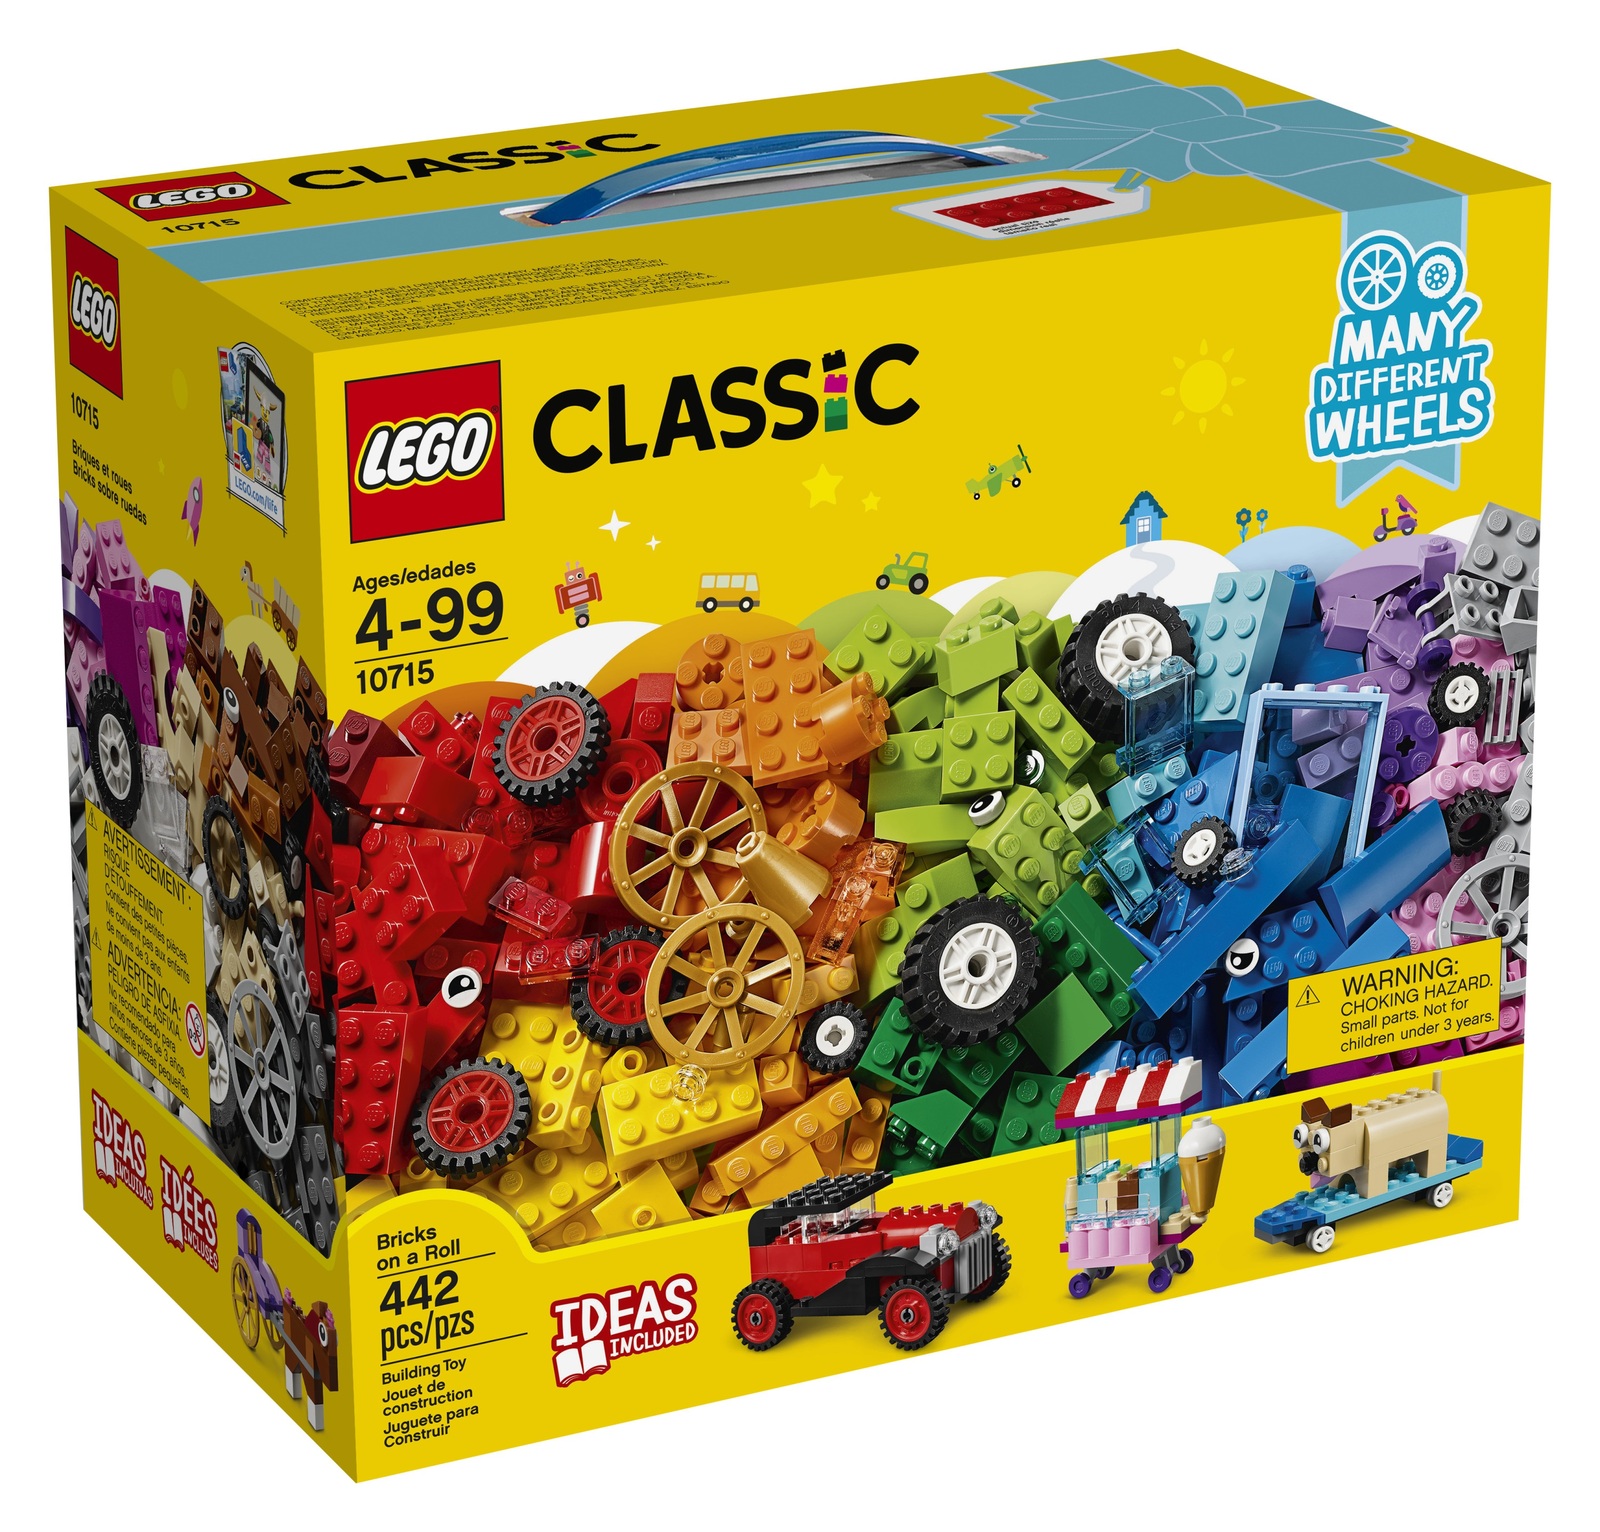 LEGO Classic Bricks on a Roll 10715 Building Blocks Kids Play Toys (442 Pieces)